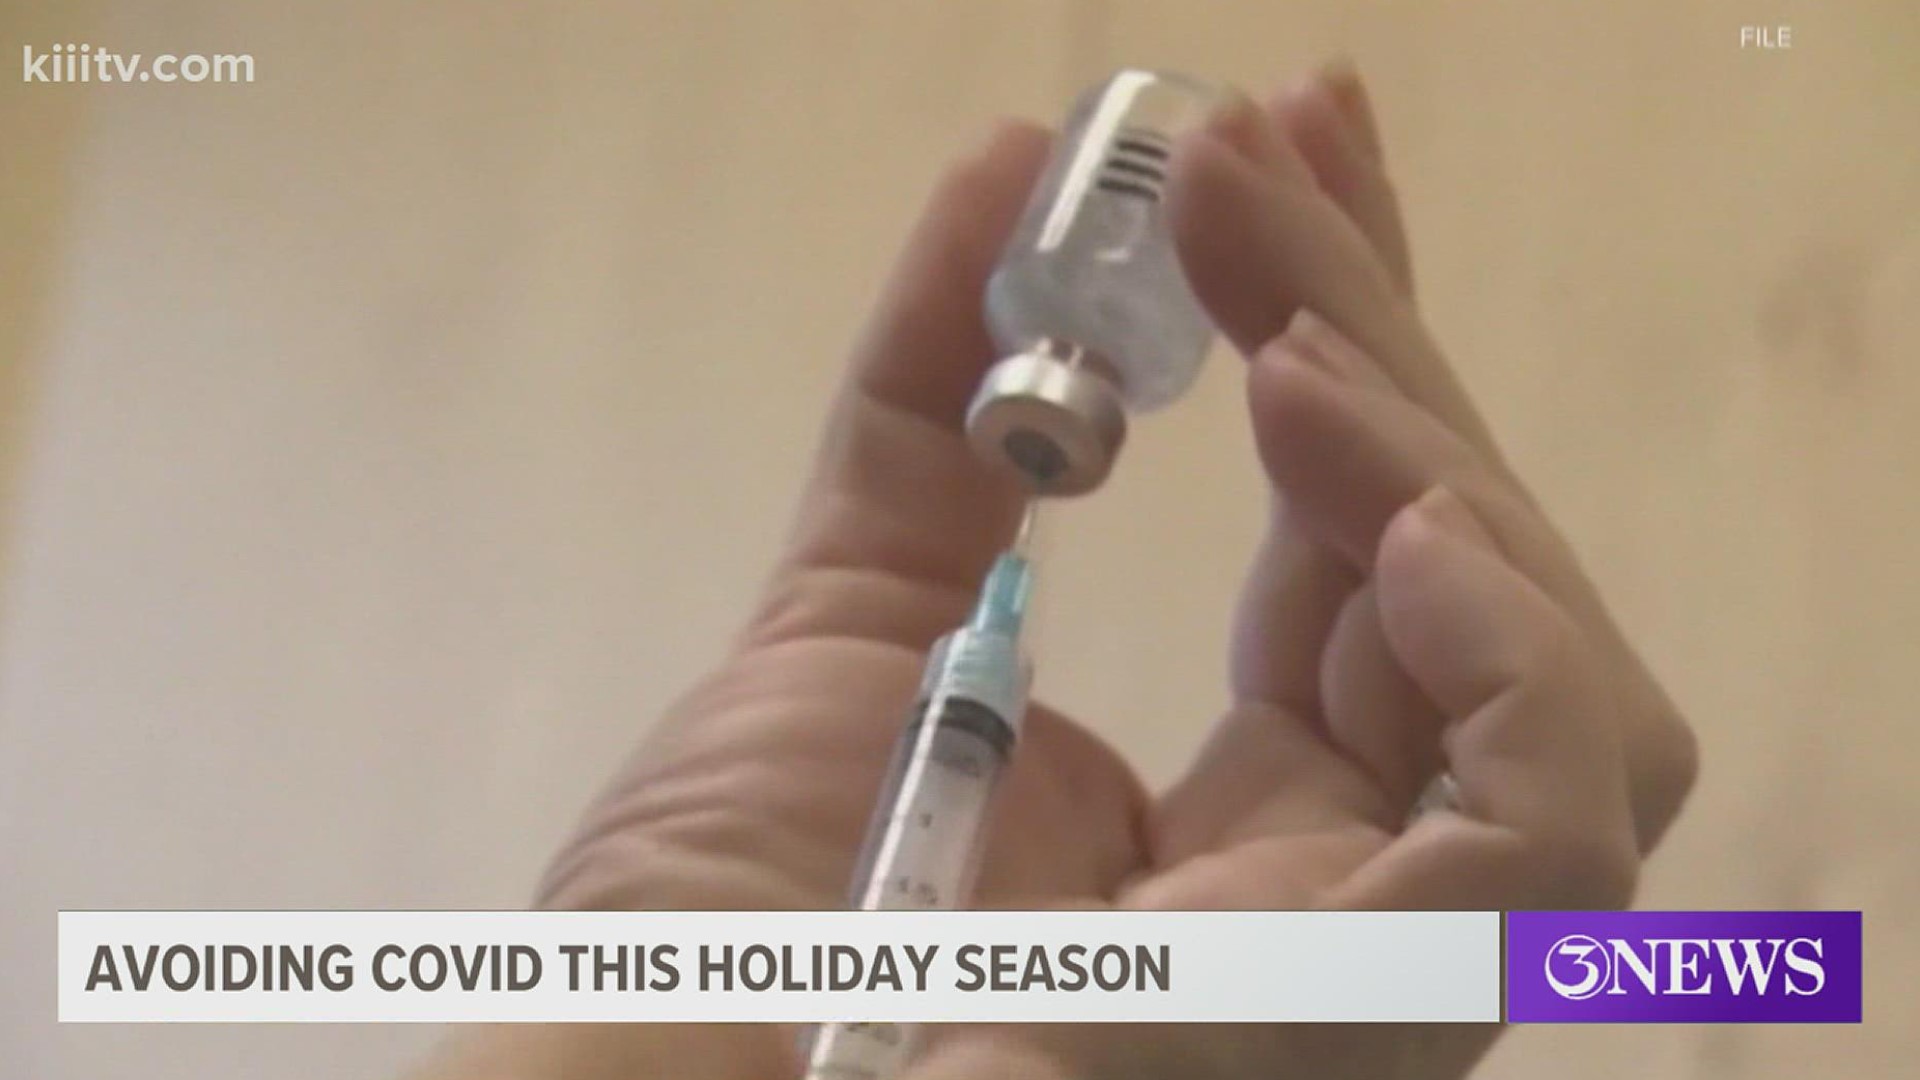 Vaccinated or not, Coastal Bend health expert Dr. Kim Onufrak said if you plan on joining in on those shopping crowds this week, to make sure you mask up.